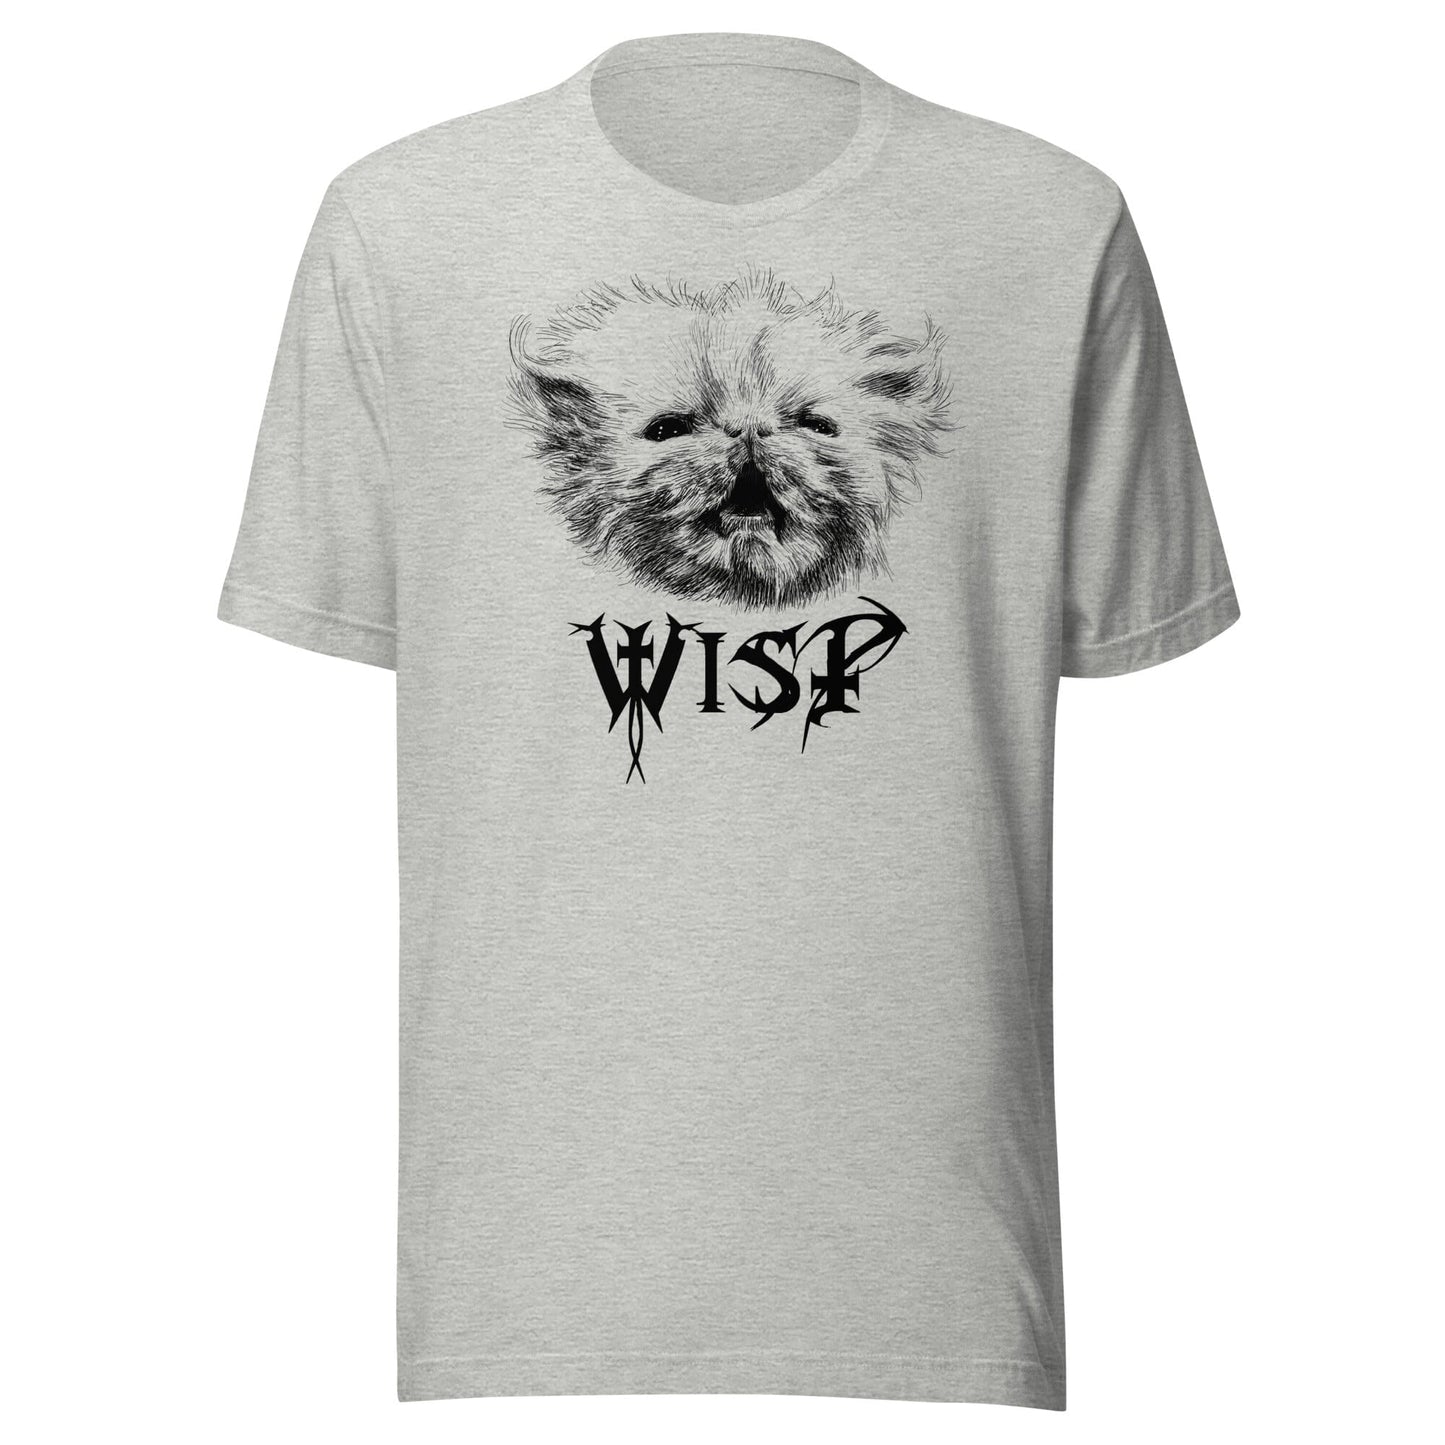 Metal Wisp T-Shirt [Unfoiled] (All net proceeds go to Rags to Riches Animal Rescue) JoyousJoyfulJoyness Athletic Heather XS 